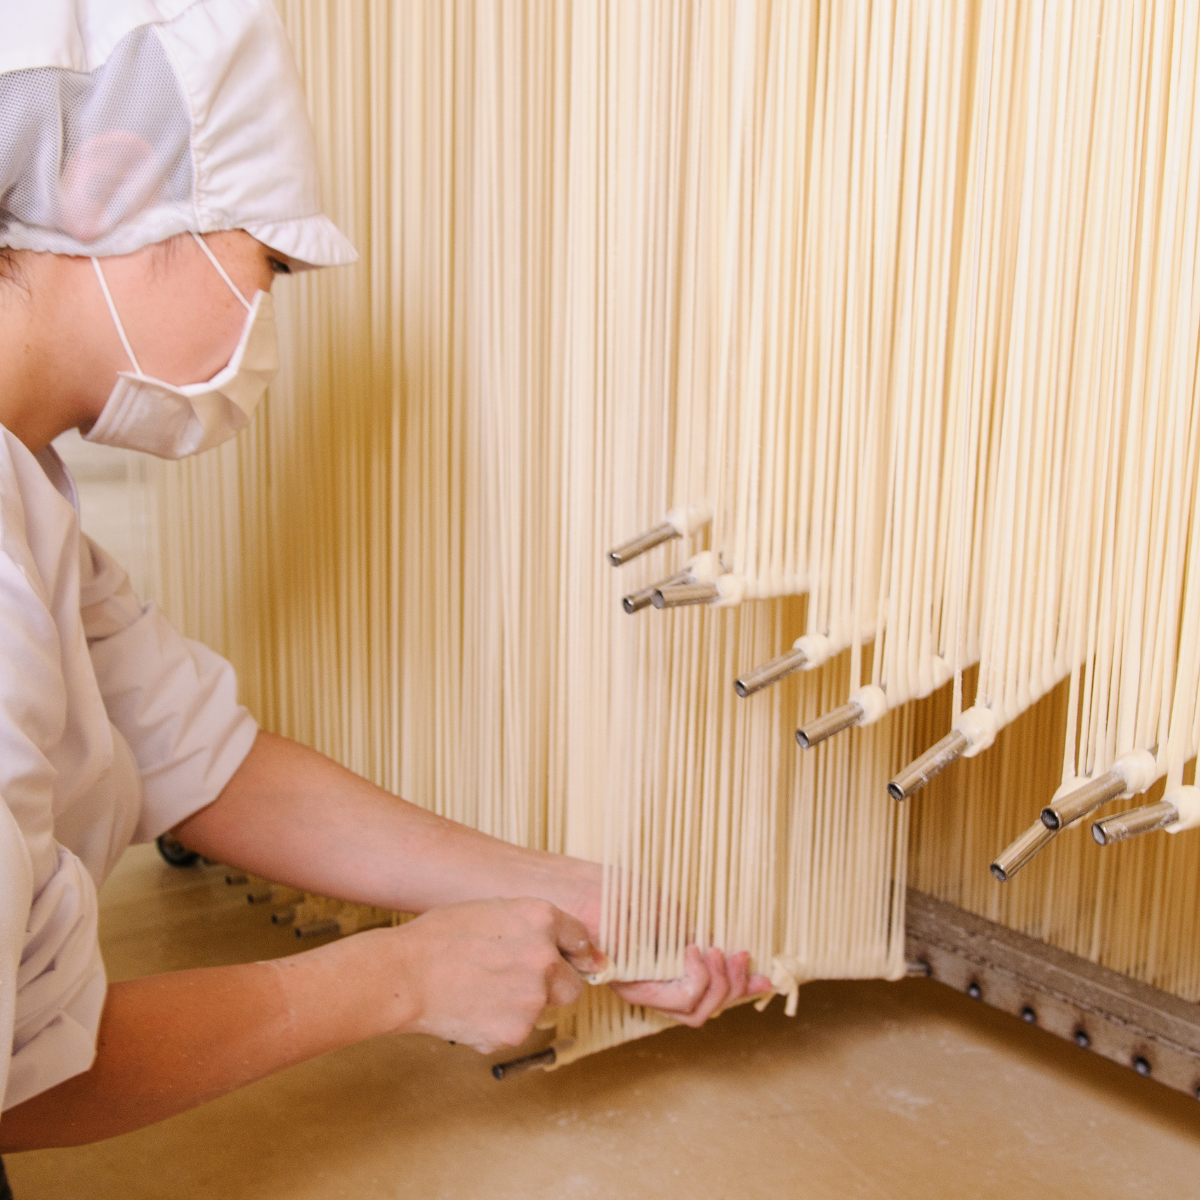 Women stretching inaniwa udon noodles by hand